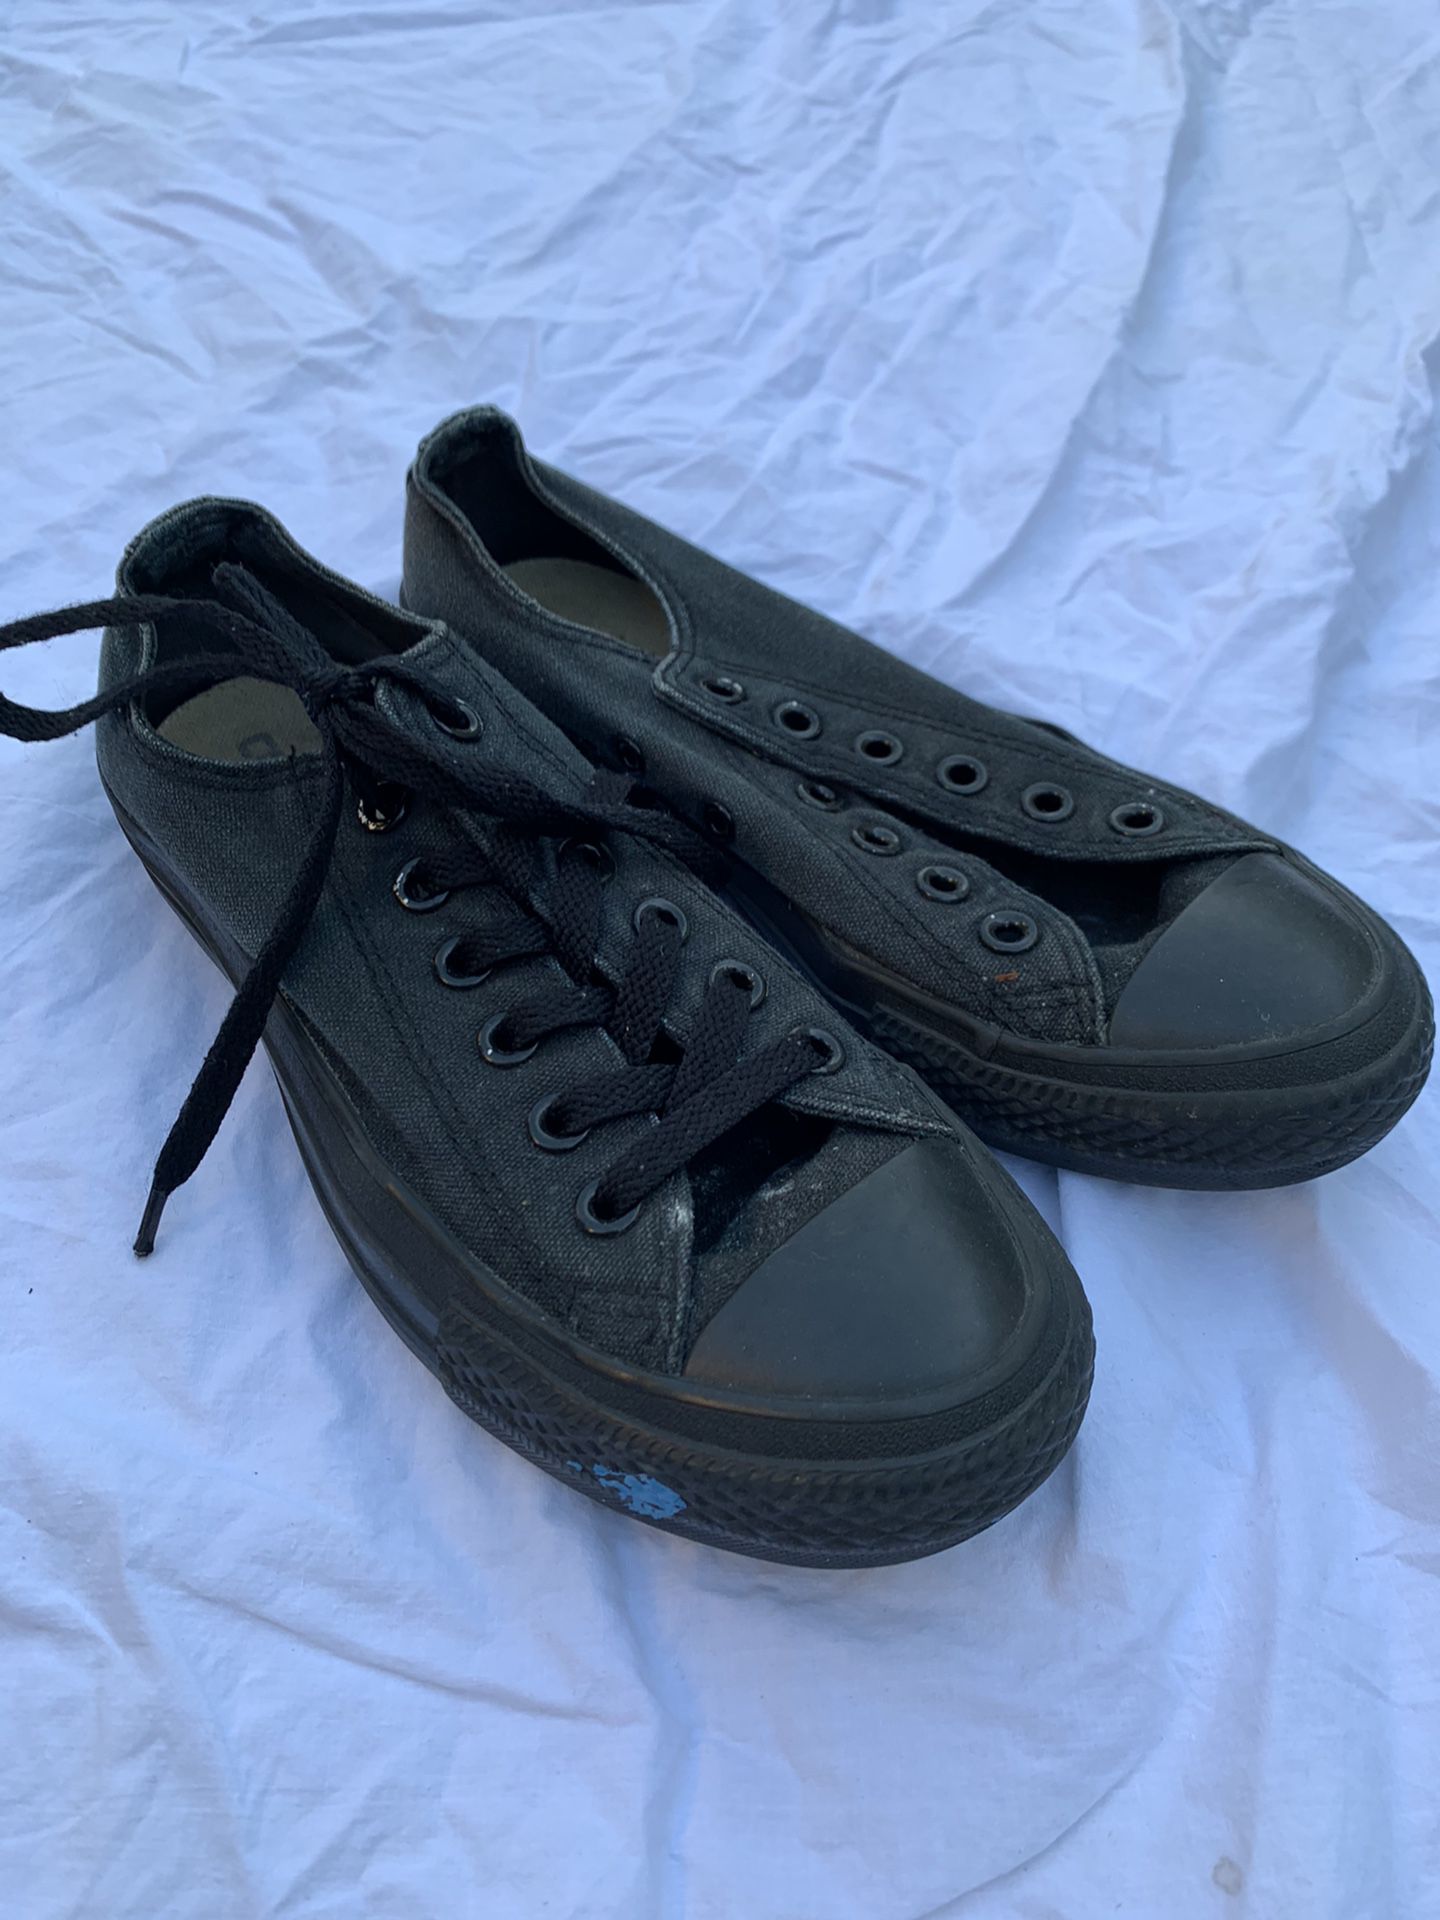 black low top converse chuck taylor all star